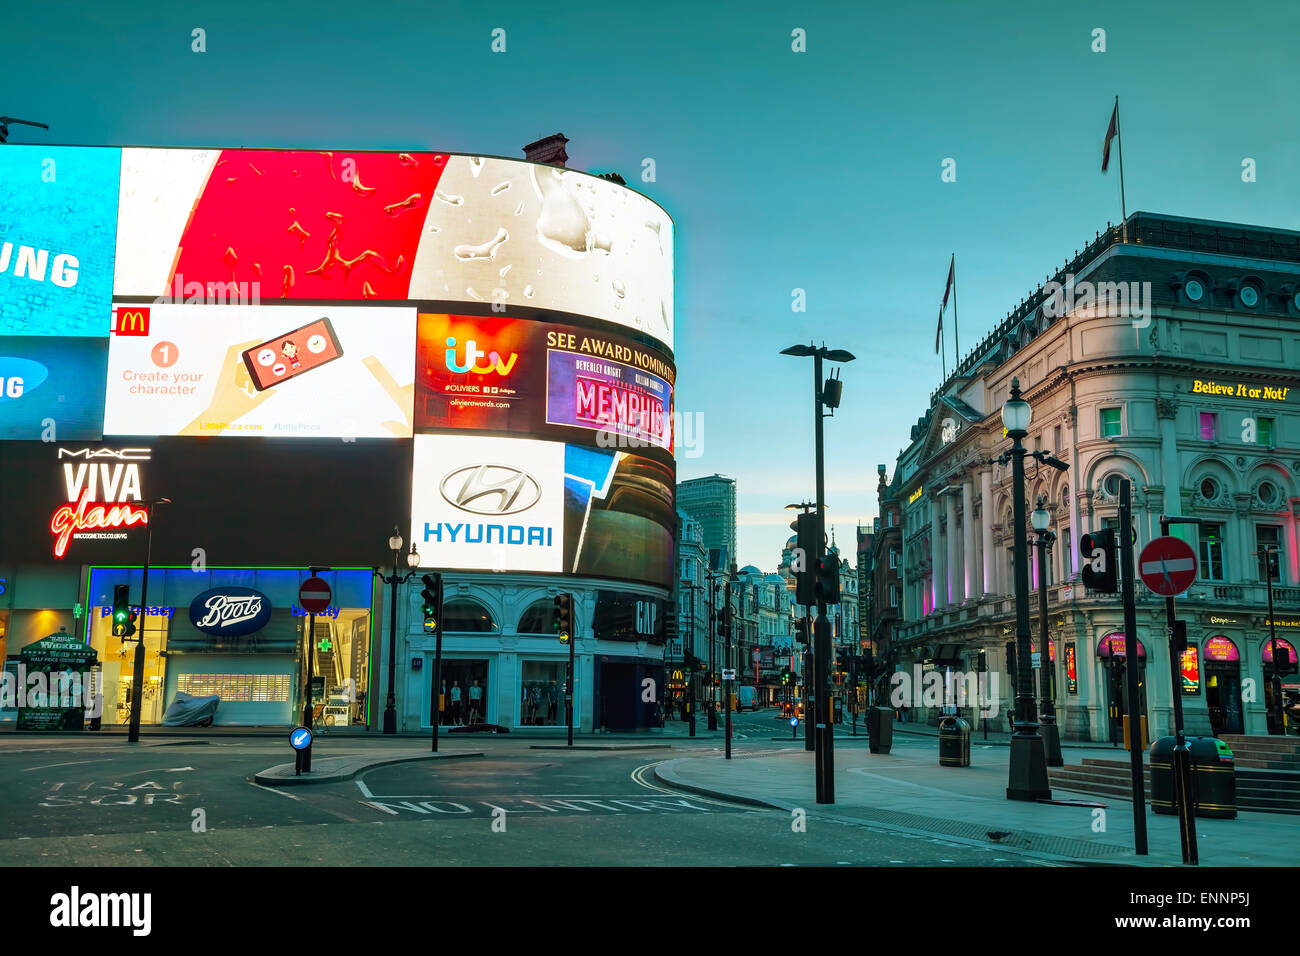 LONDON - APRIL 12: Piccadilly Circus junction early in the morning on April 12, 2015 in London, UK. Stock Photo